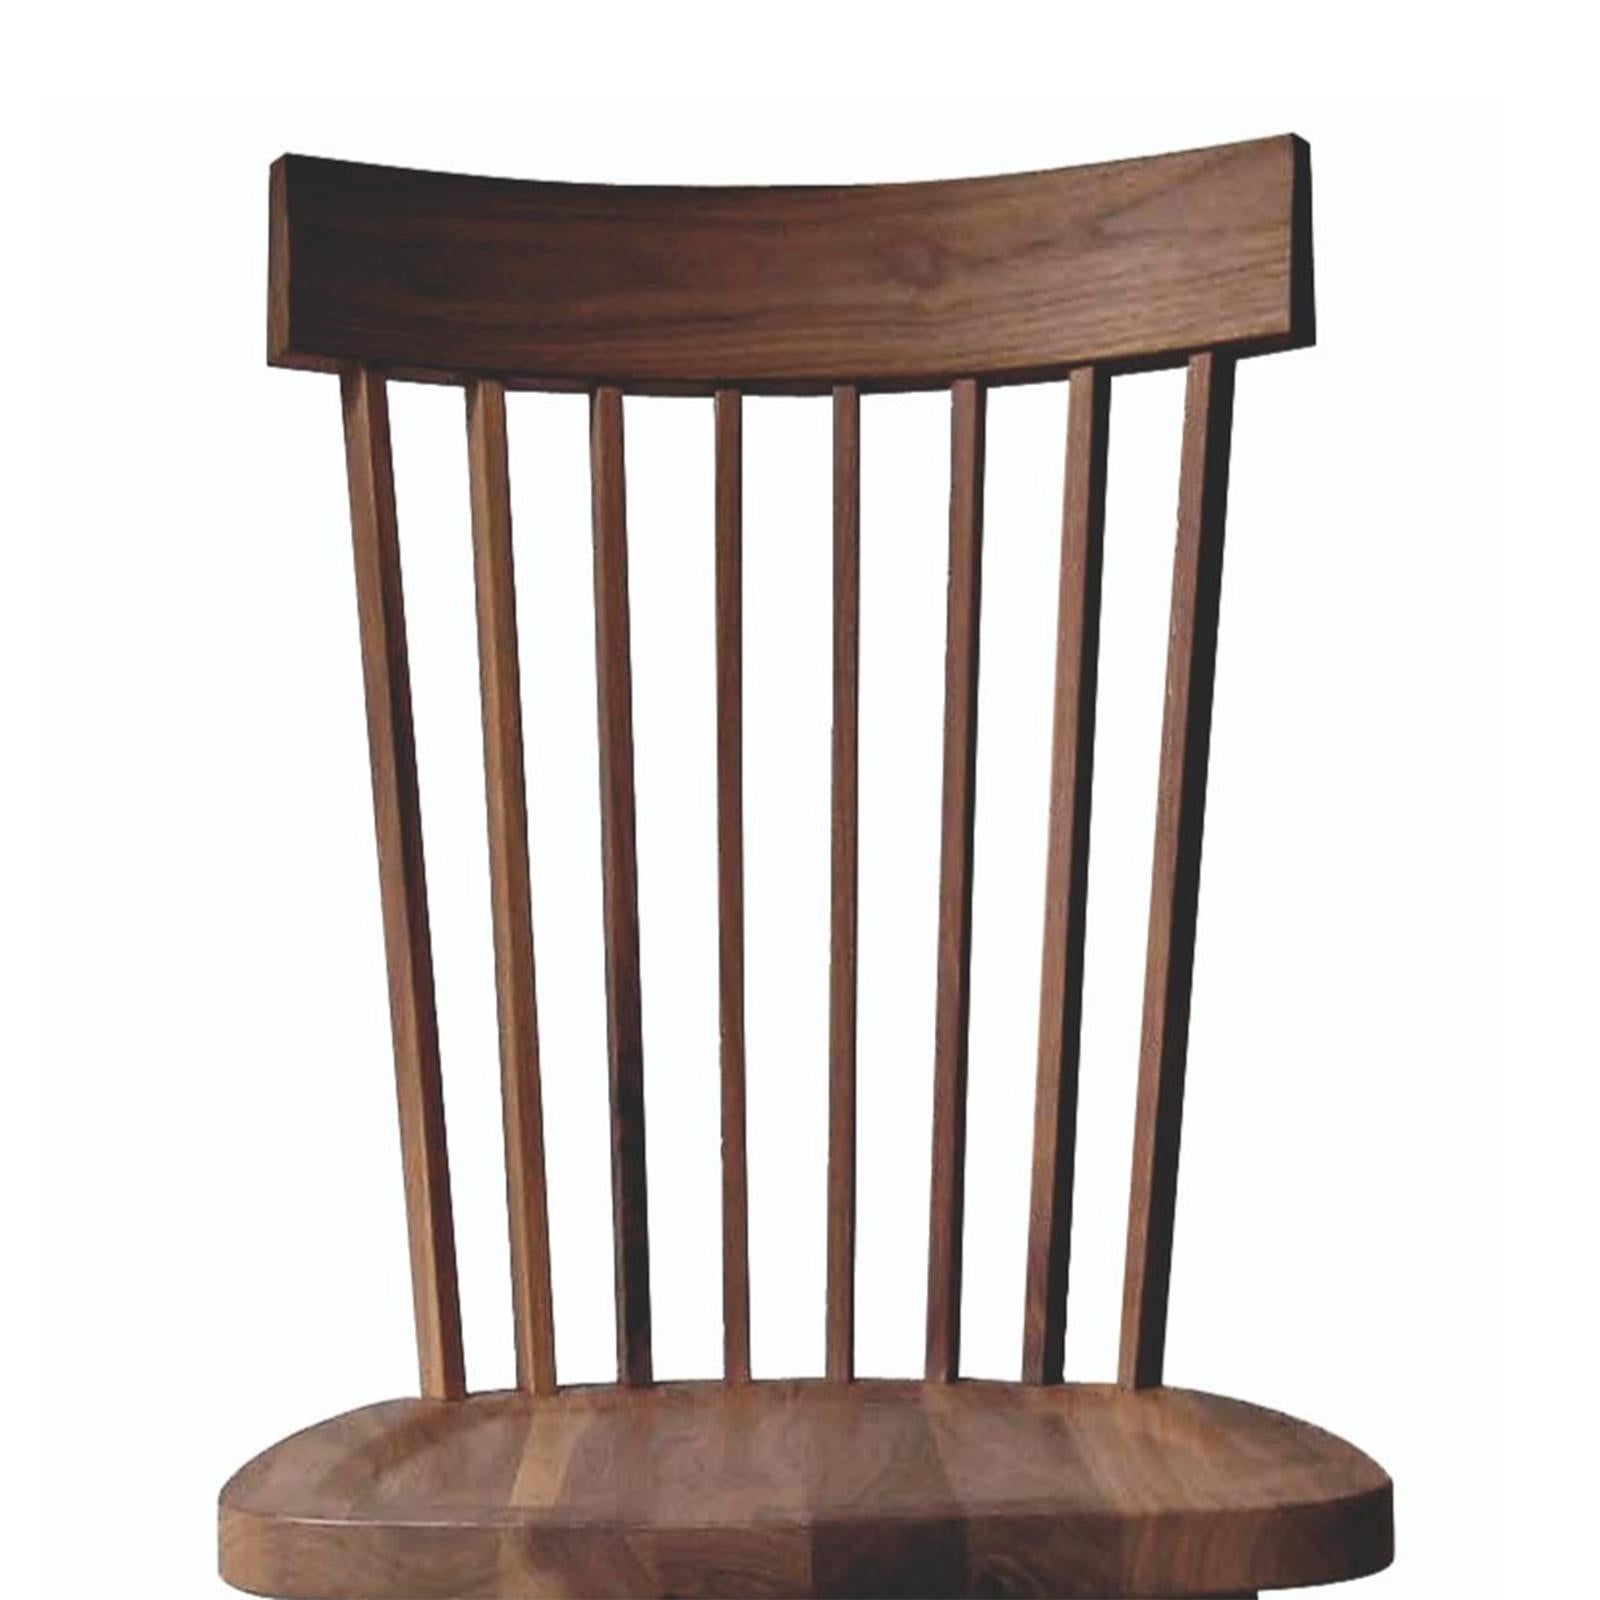 Chair Premia walnut all in solid
American walnut wood in natural
matte varnished. Also available in 
solid oak upon request.